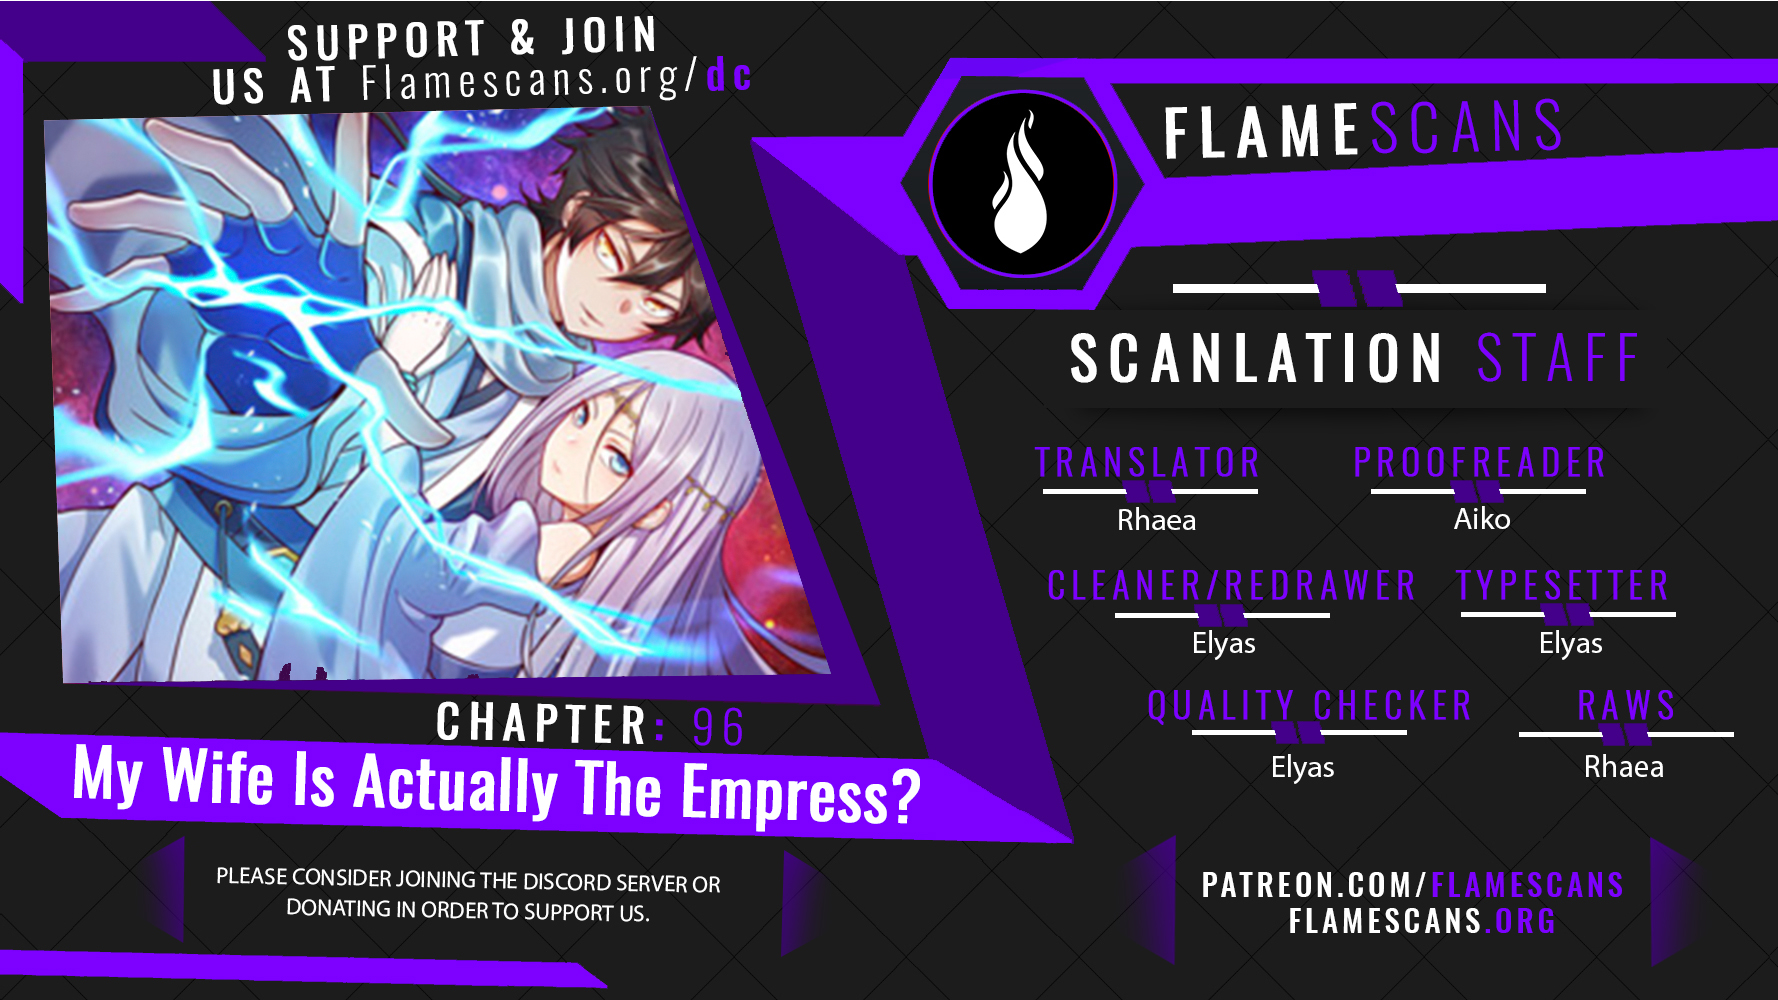 My Wife Is Actually The Empress? - Chapter 20601 - Page 1